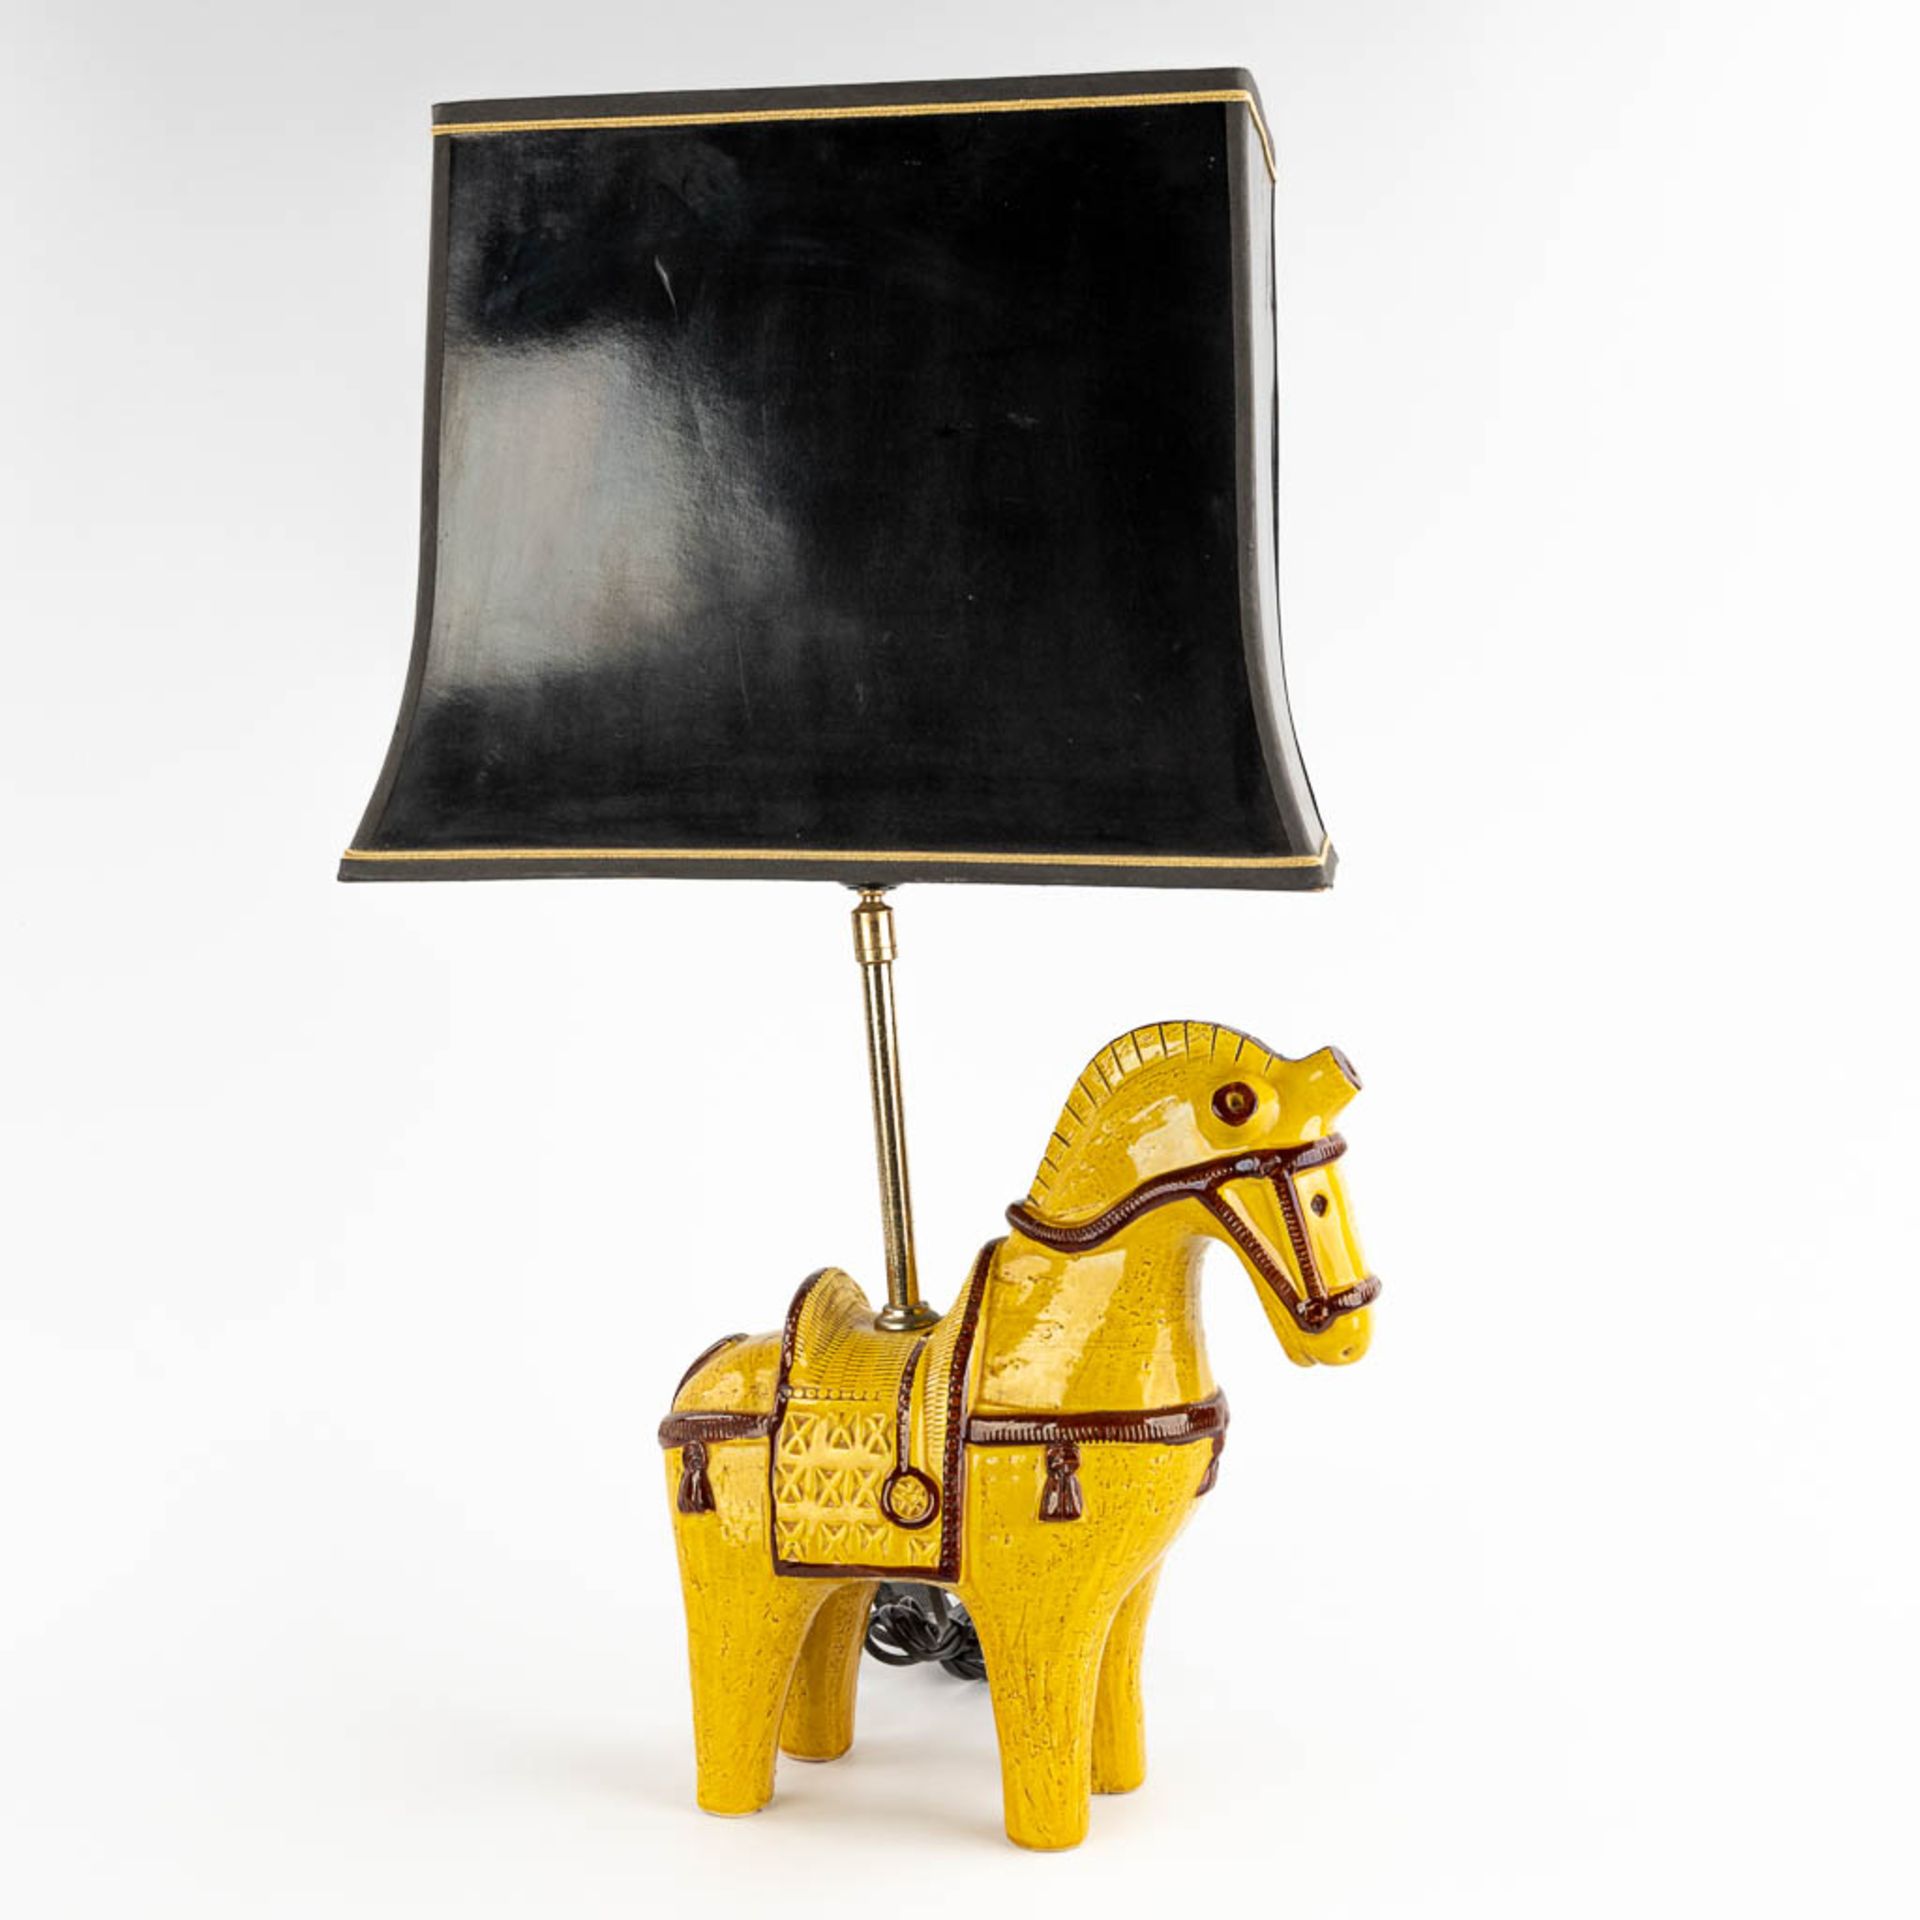 Aldo LONDI (1911-2003) 'Table Lamp with a yellow horse' for Bitossi. (D:12 x W:30 x H:32 cm)